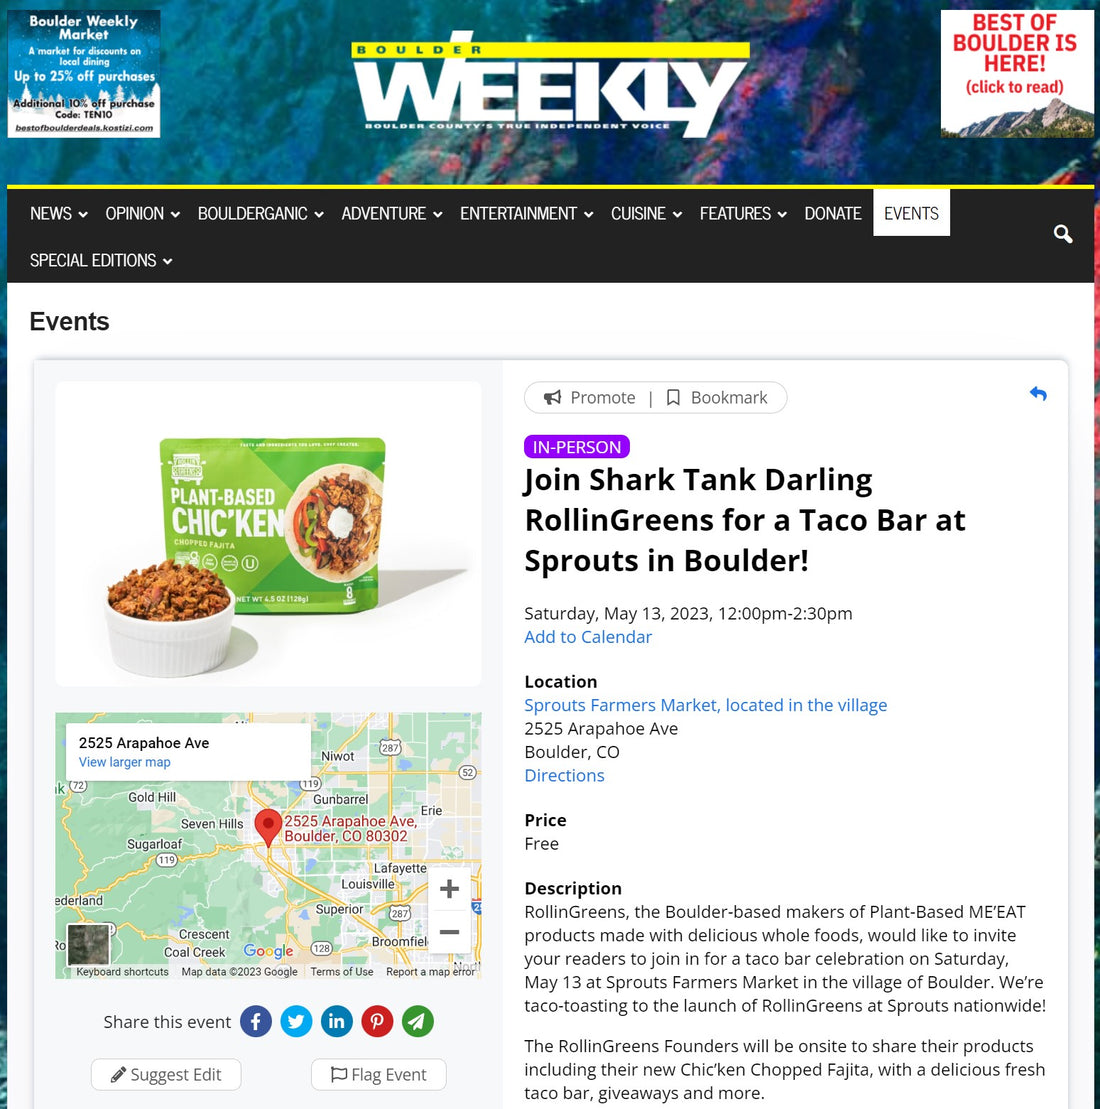 Event featured in Boulder Weekly!